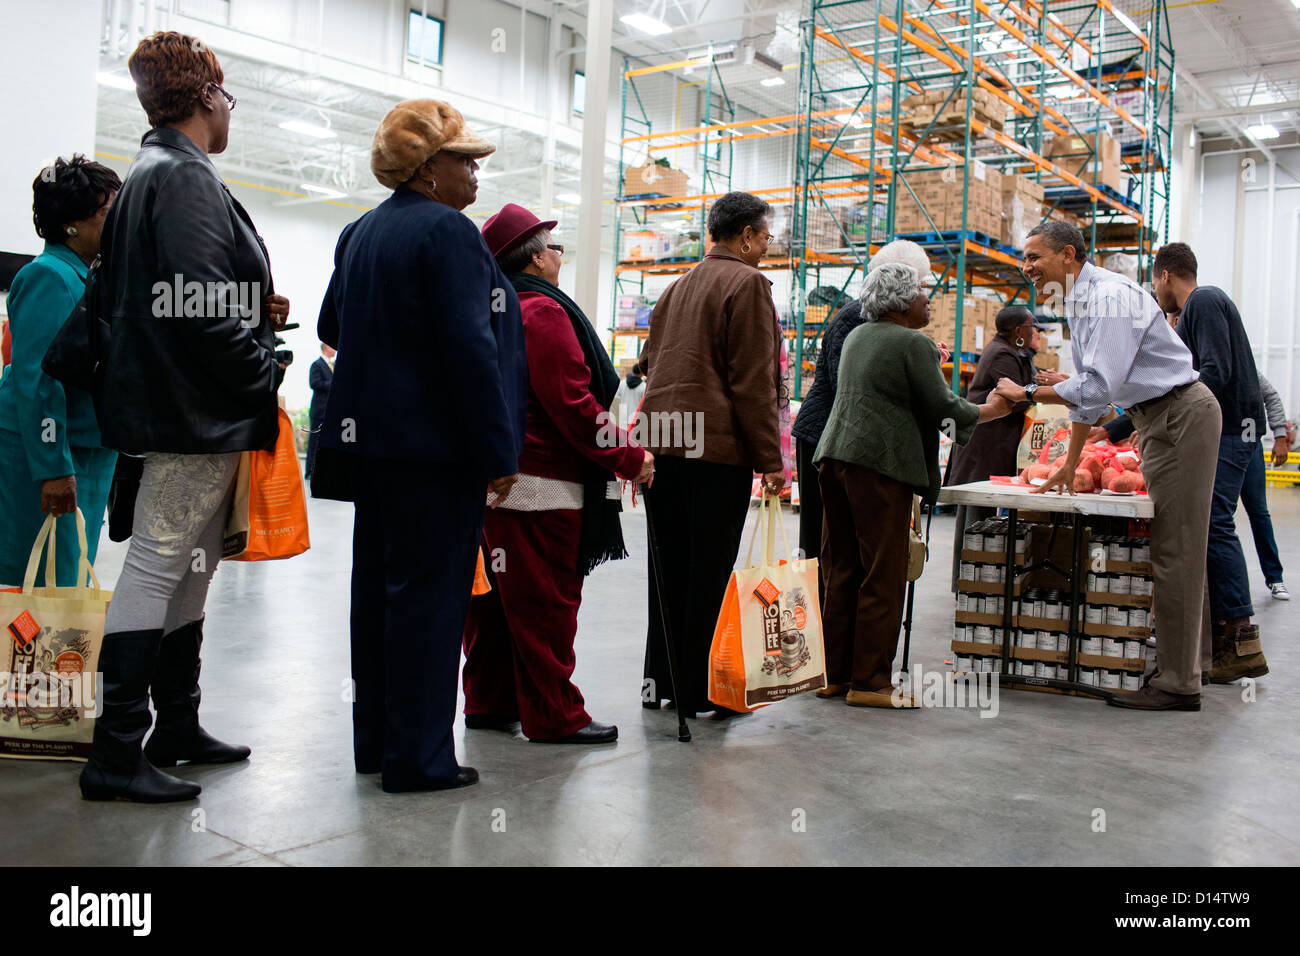 US President Barack Obama greets people during a family service project at the Capital Area Food Bank November 21, 2012 in Washington, DC. Stock Photo